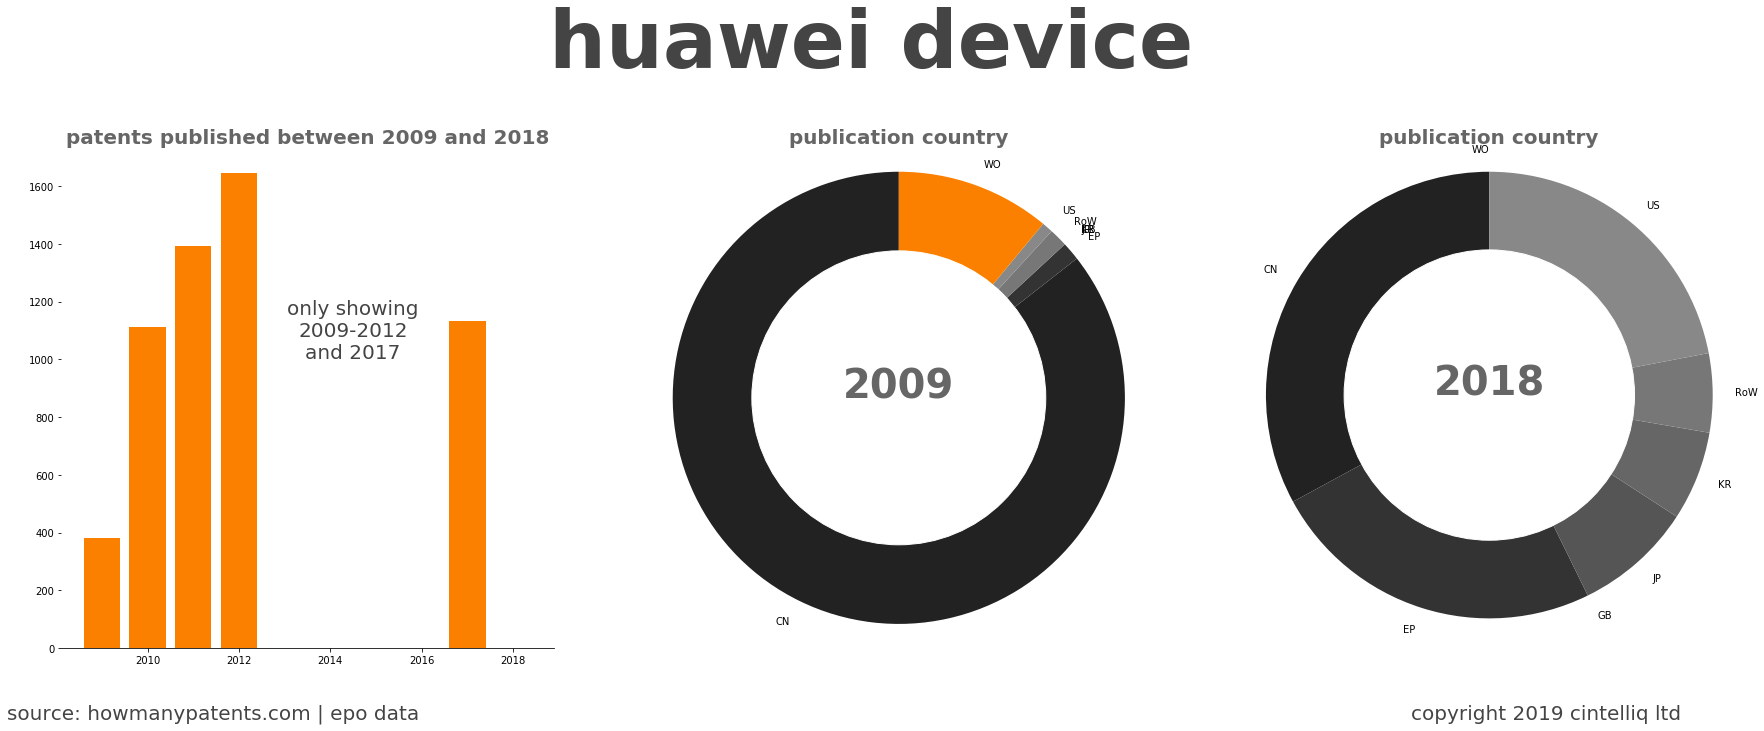 summary of patents for Huawei Device